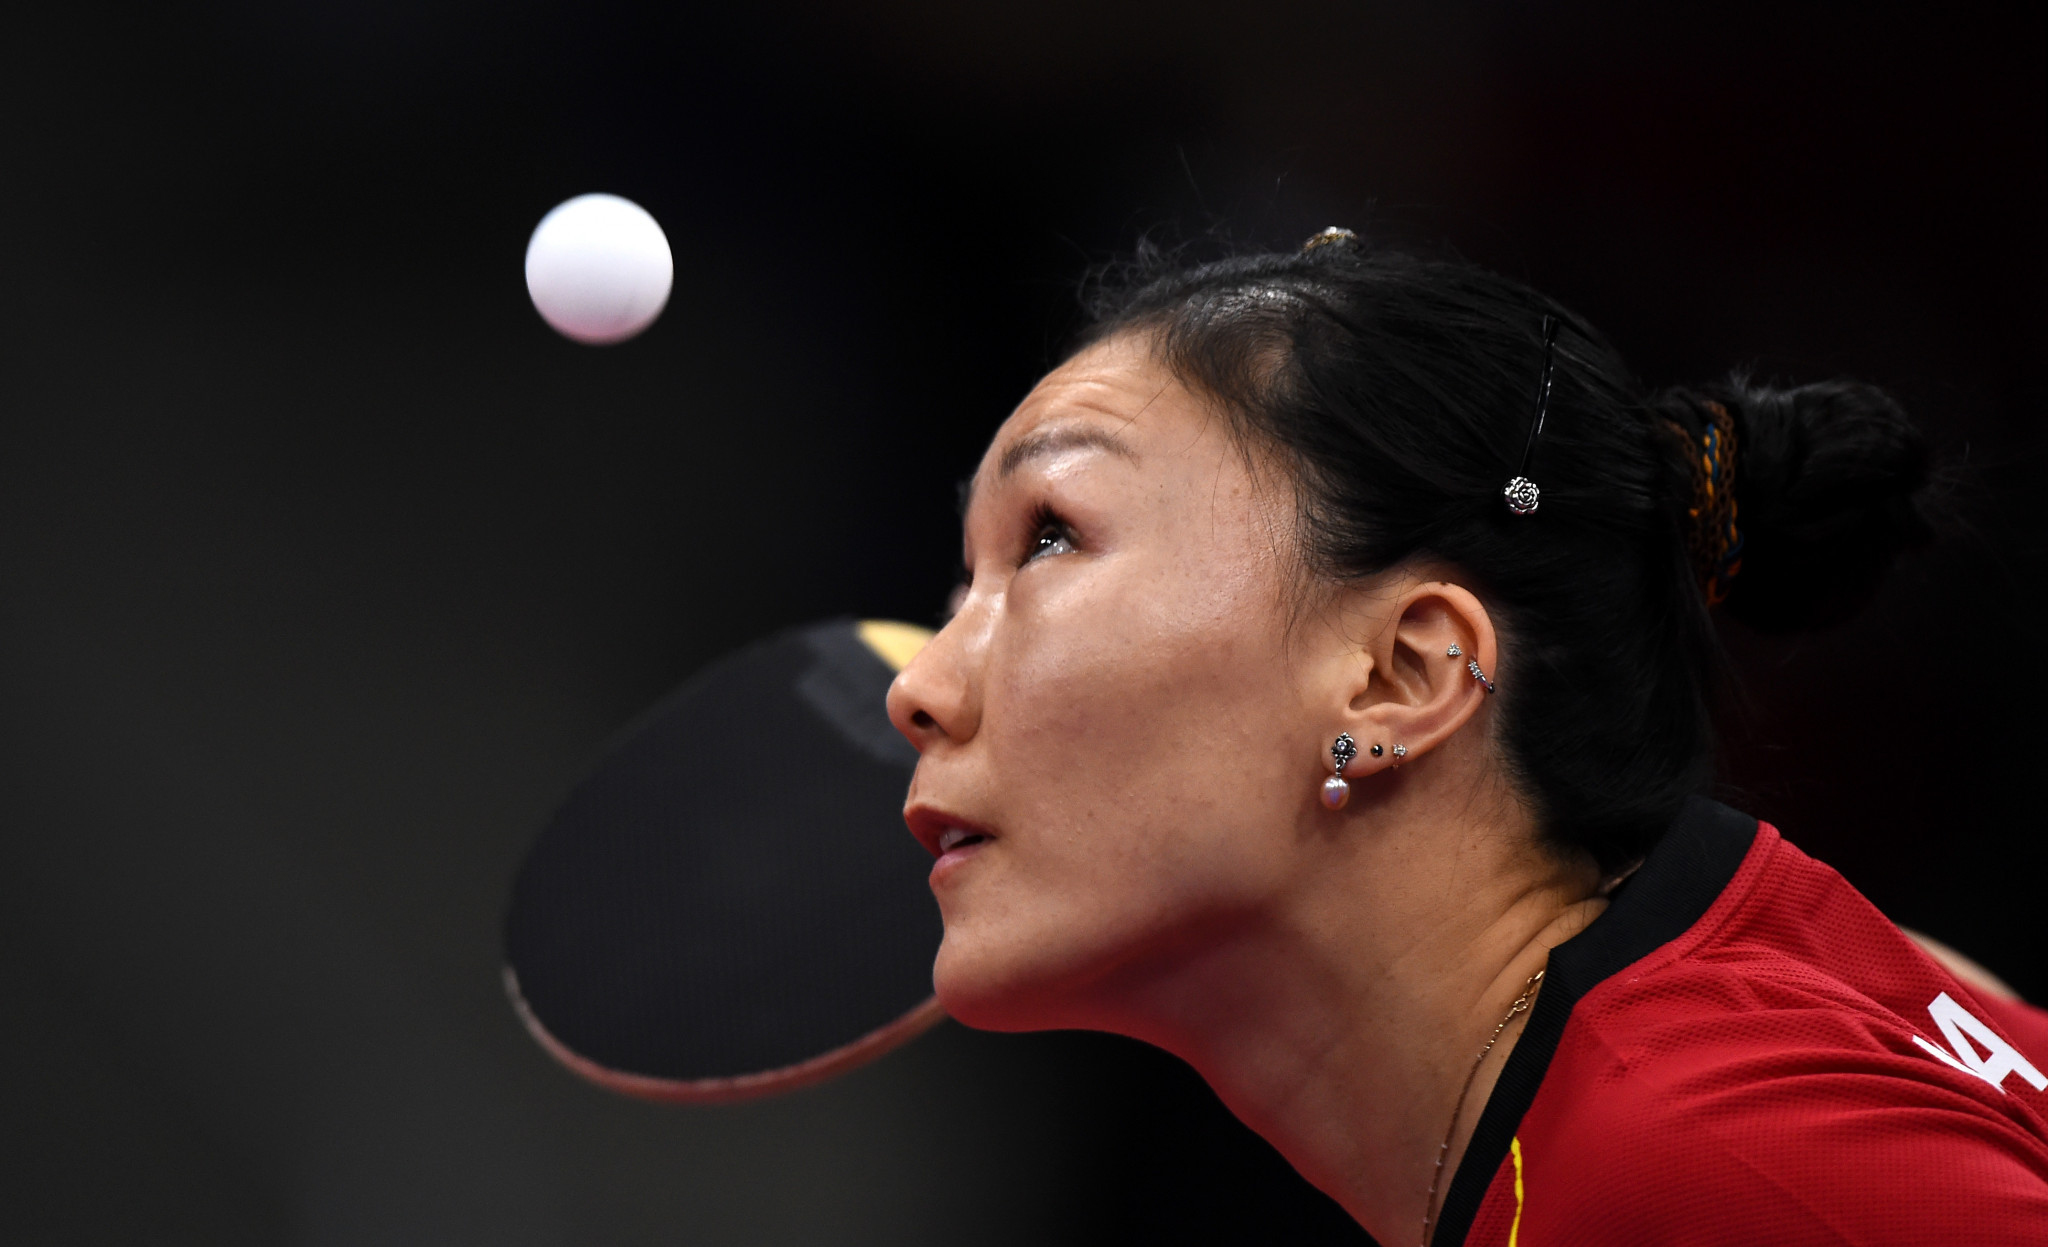 Both table tennis finalists at Minsk 2019 will earn Olympic qualification places ©Getty Images